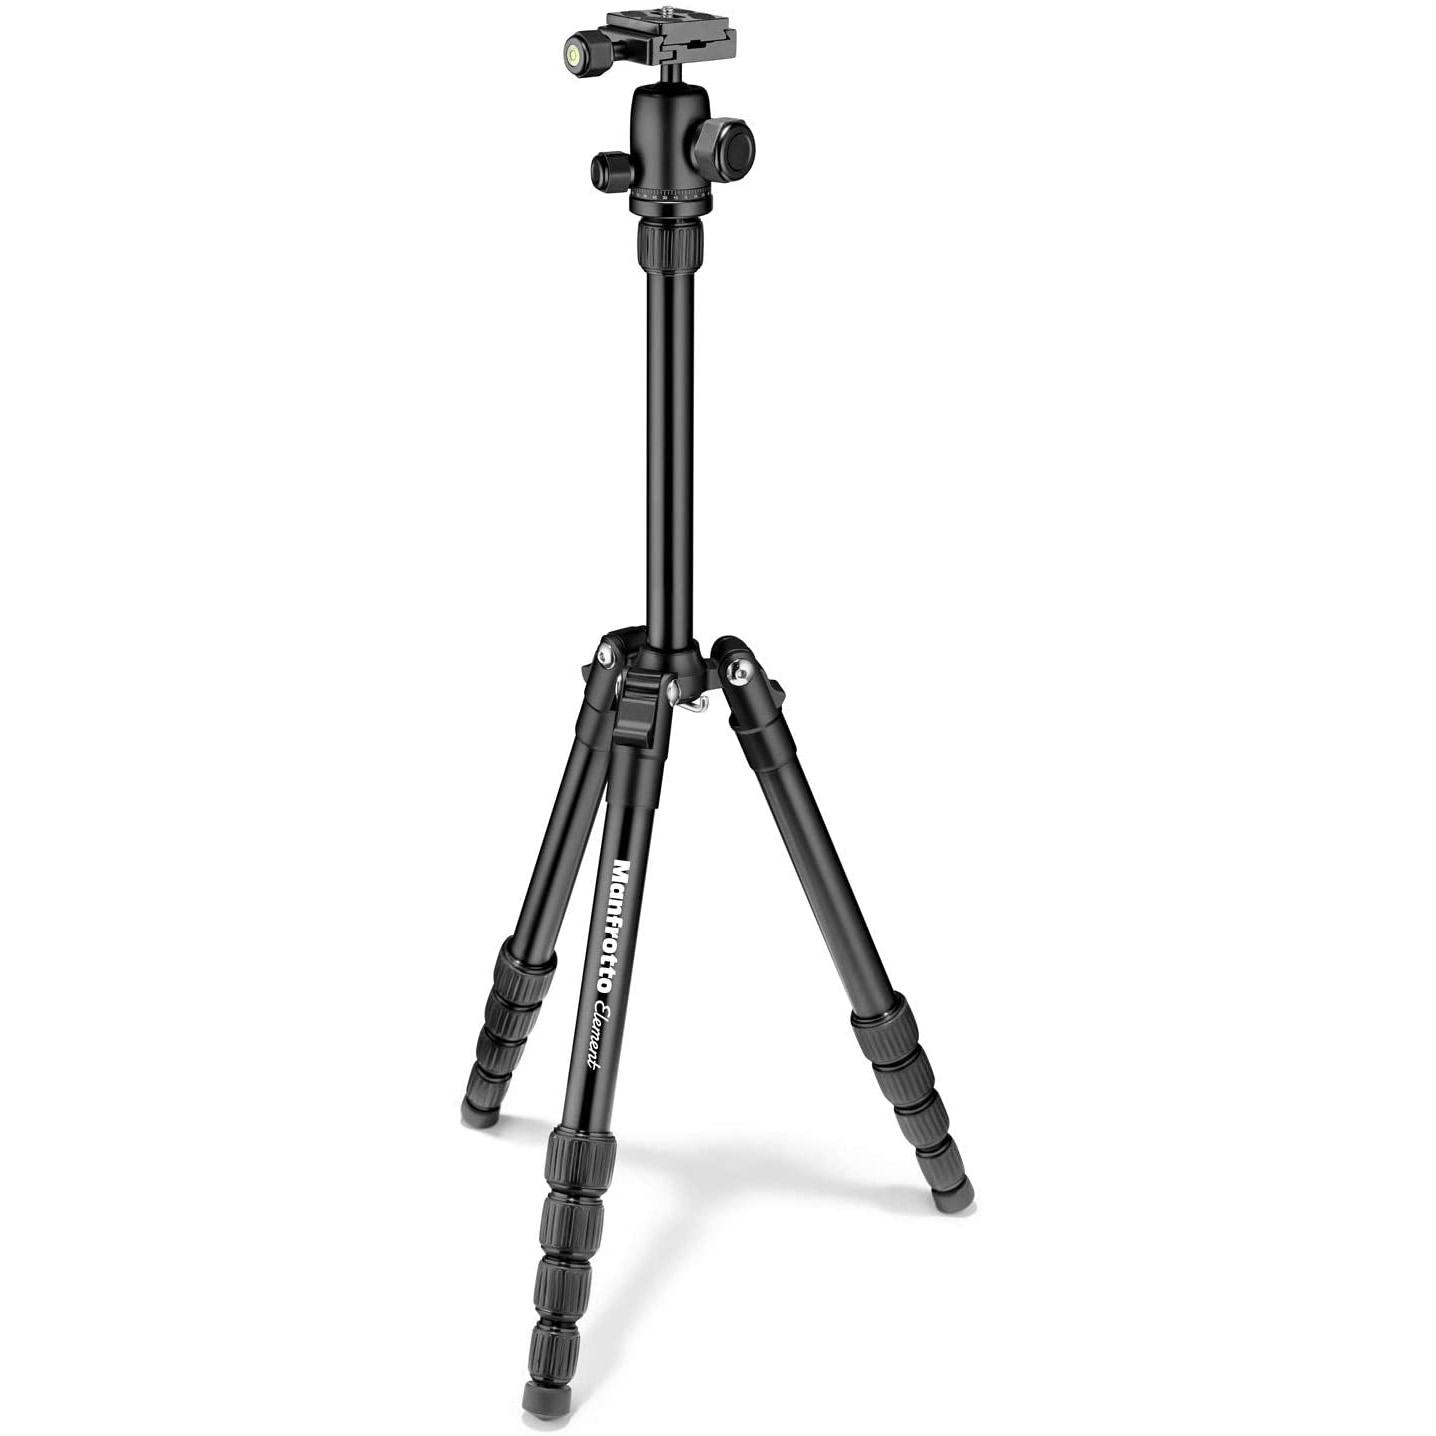 56.3in Manfrotto Element Traveller Aluminum 5-Section Tripod Kit for $62.50 Shipped